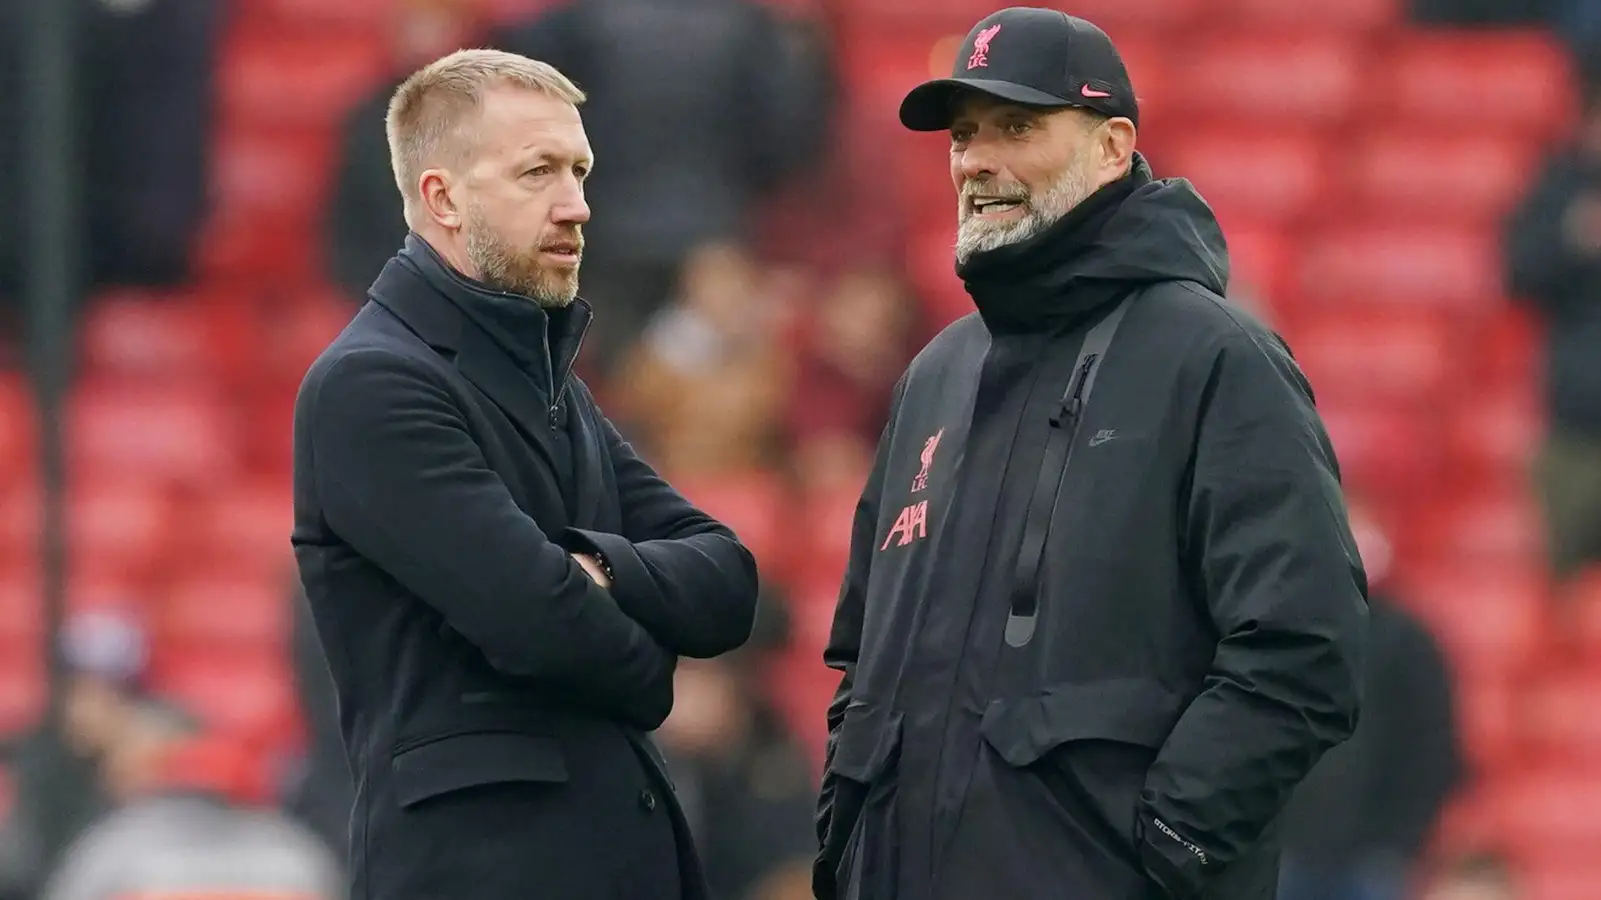 Graham Potter and Jurgen Klopp in conversation before Liverpool face Chelsea in the Premier League.